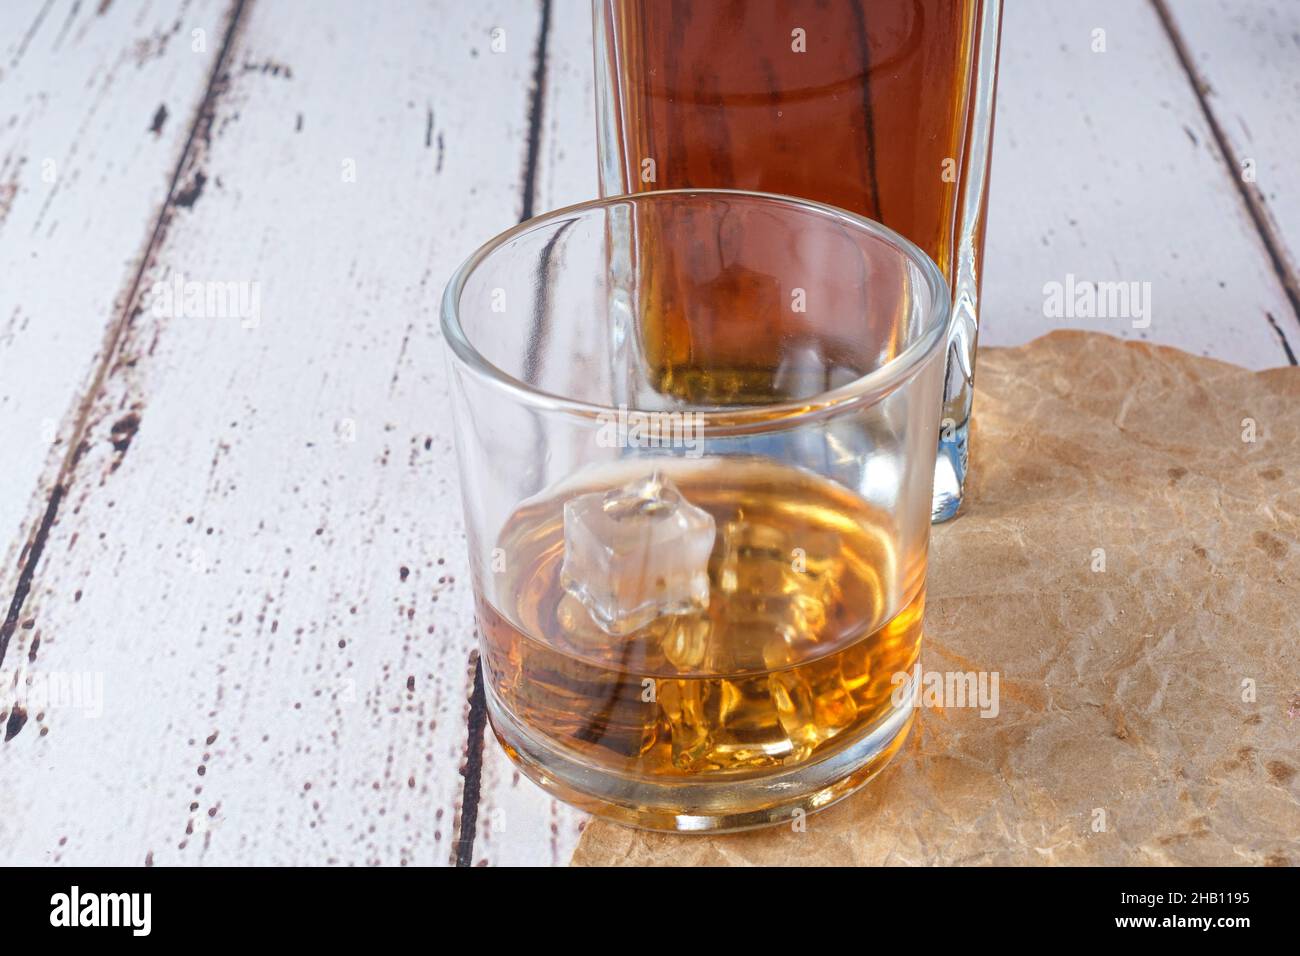 Glass of whiskey with ice on brown paper. In the background, a bottle of whiskey. Stock Photo